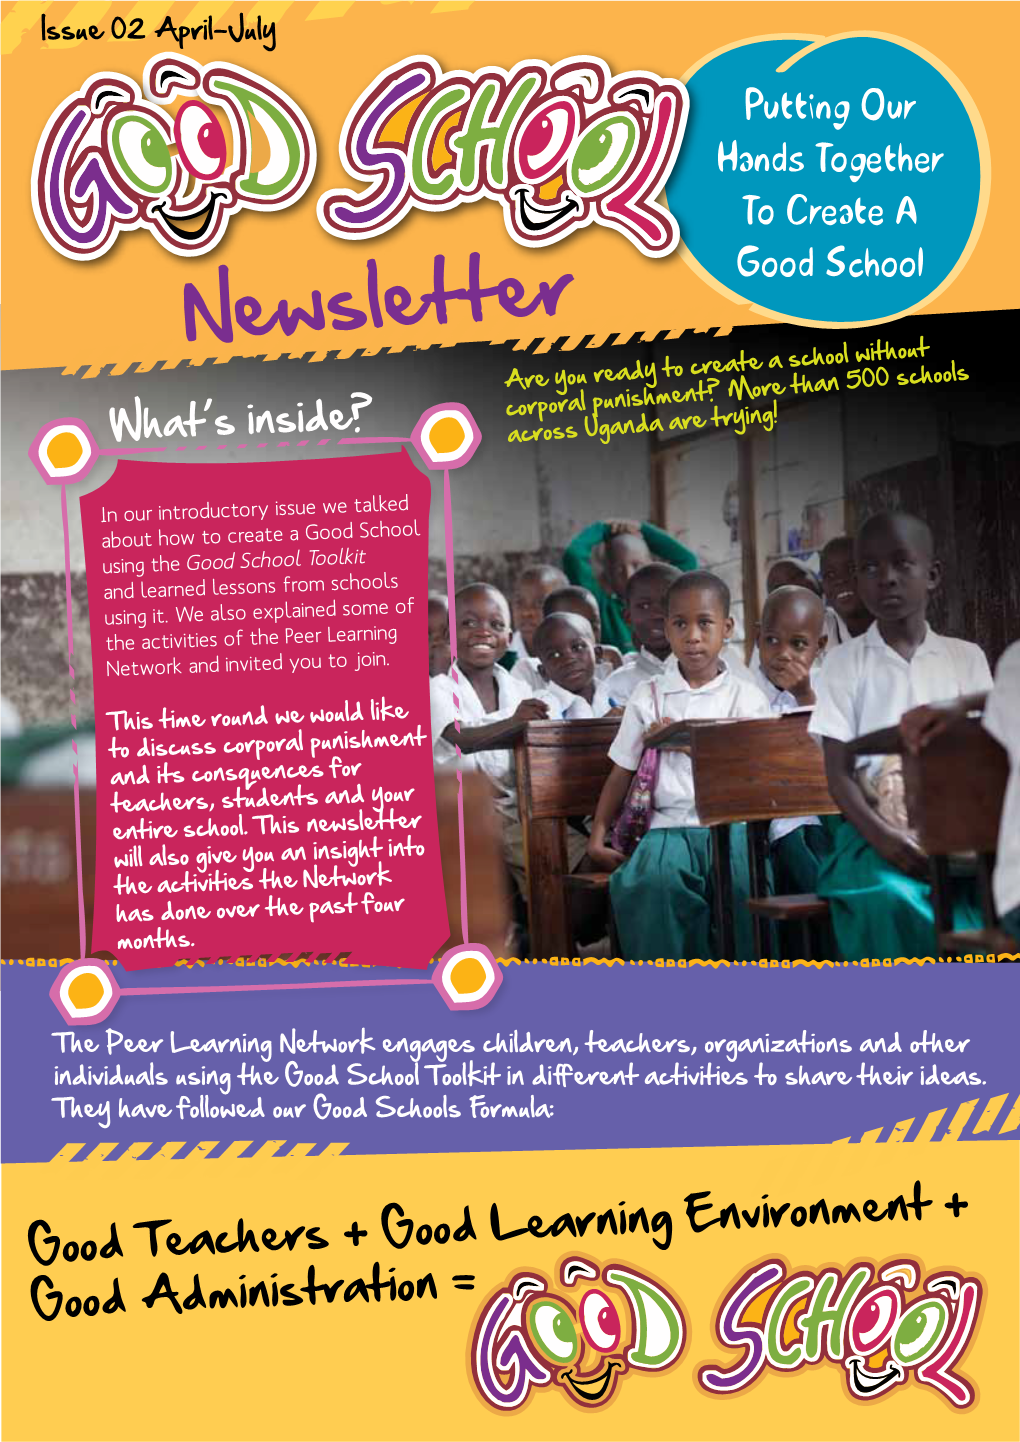 Newsletter Are You Ready to Create a School Without Corporal Punishment? More Than 500 Schools What’S Inside? Across Uganda Are Trying!